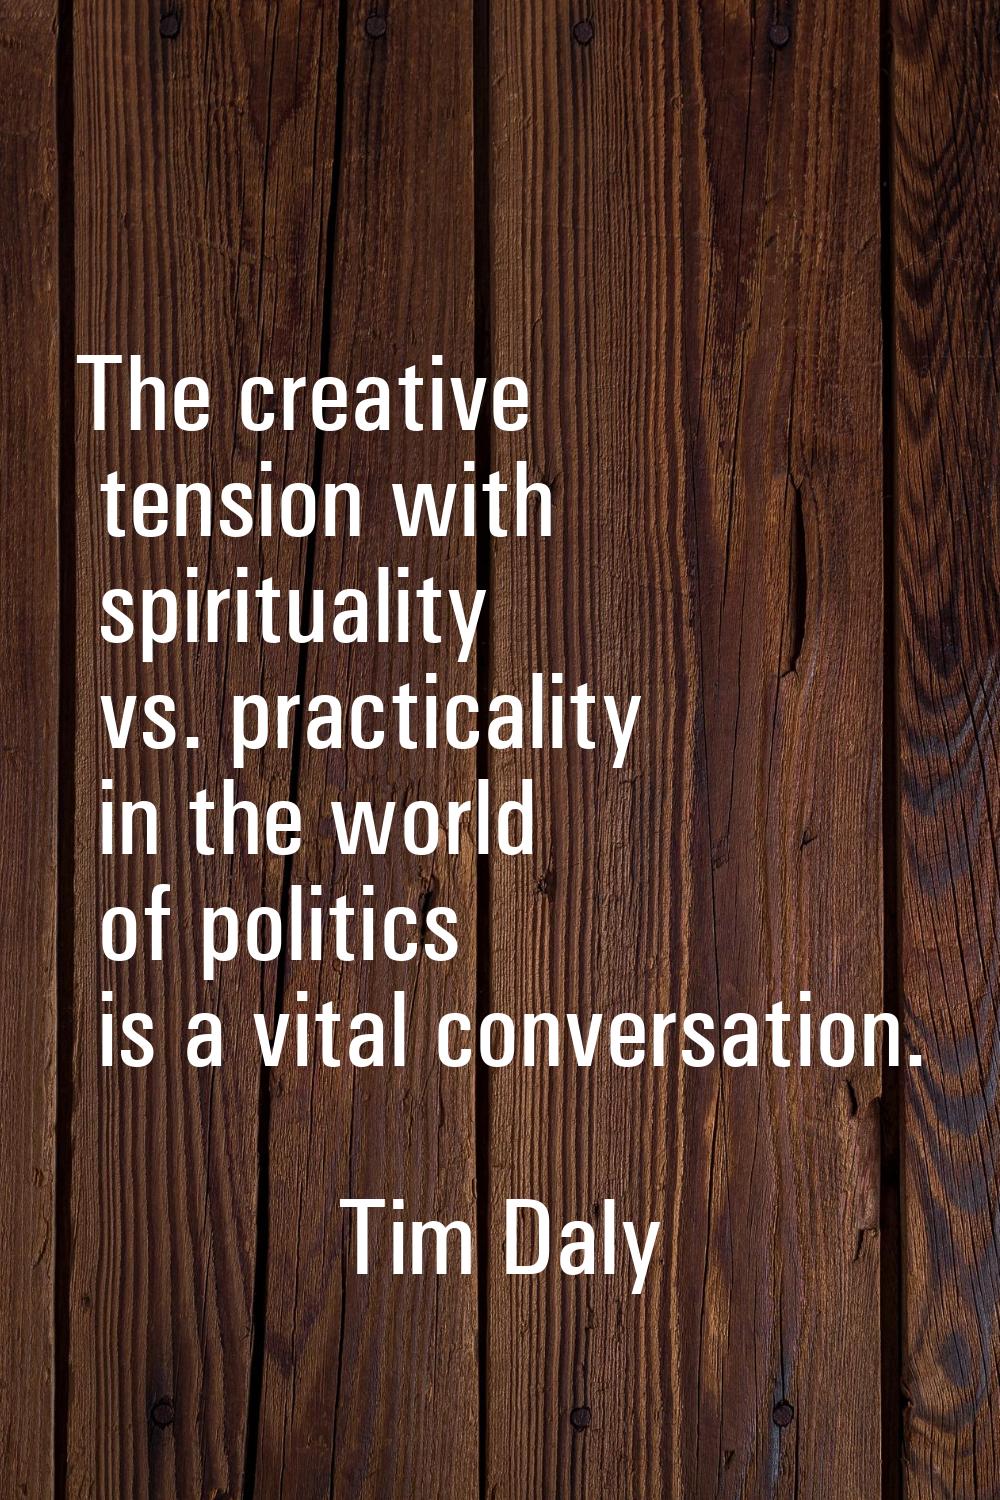 The creative tension with spirituality vs. practicality in the world of politics is a vital convers